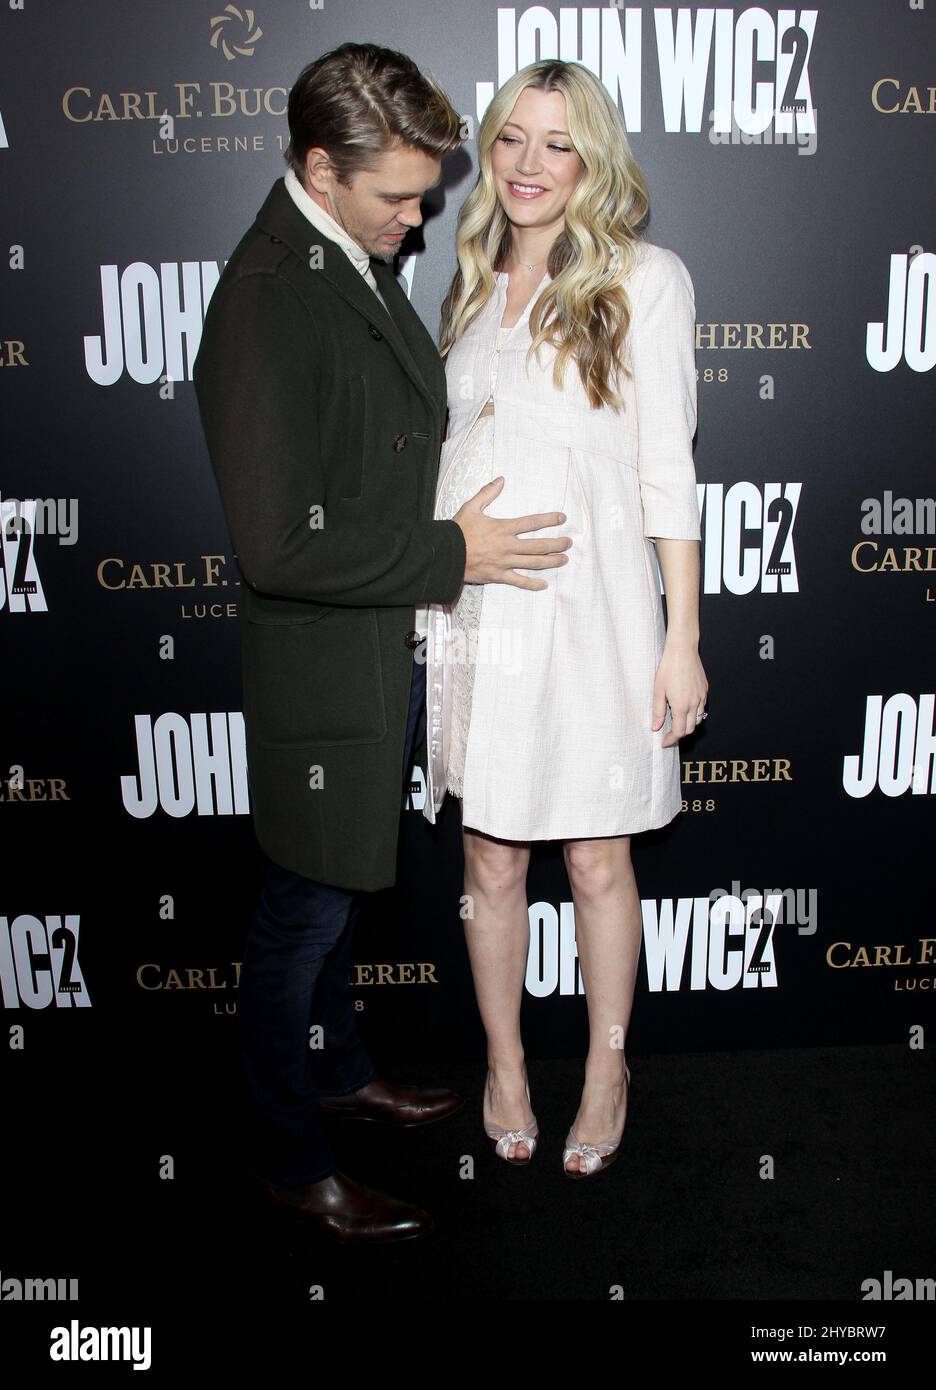 Chad Michael Murray and Sarah Roemer attending the premiere of John Wick: Chapter Two, in Los Angeles, California Stock Photo